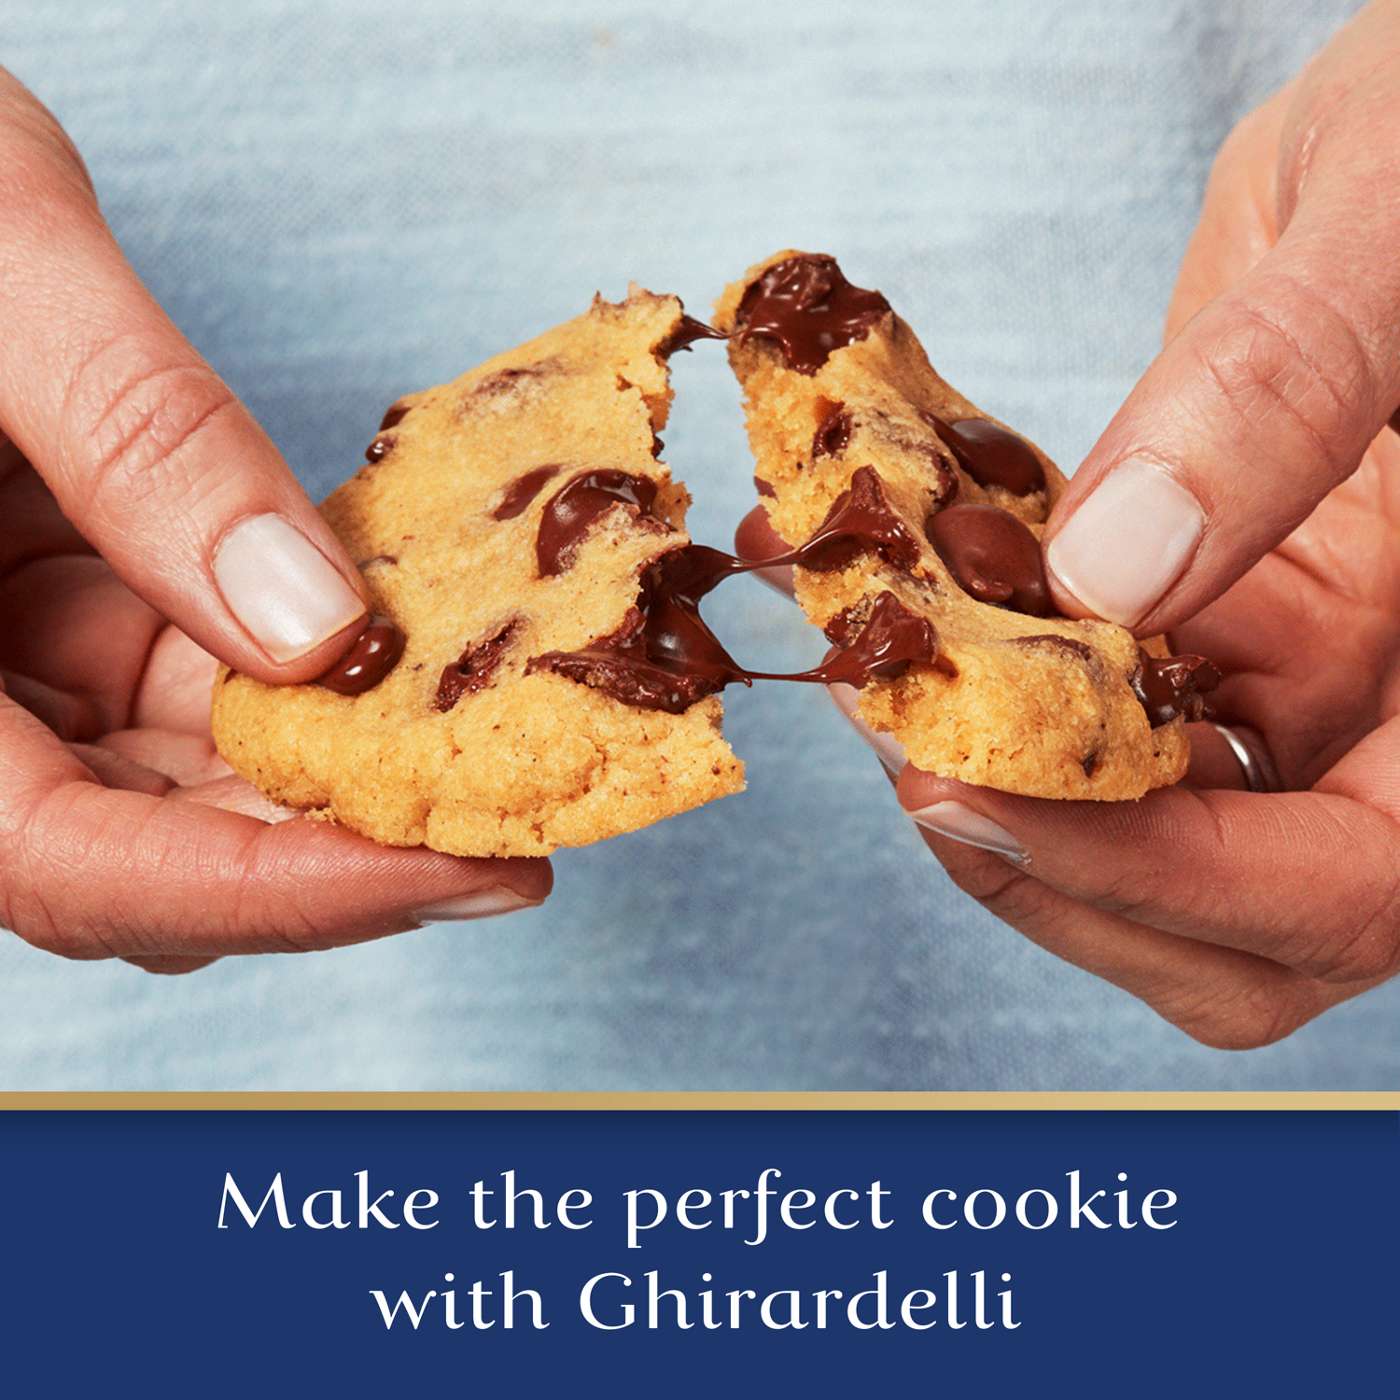 Ghirardelli 100% Cacao Unsweetened Chocolate Chips for Baking, Premium Baking Chips; image 4 of 7